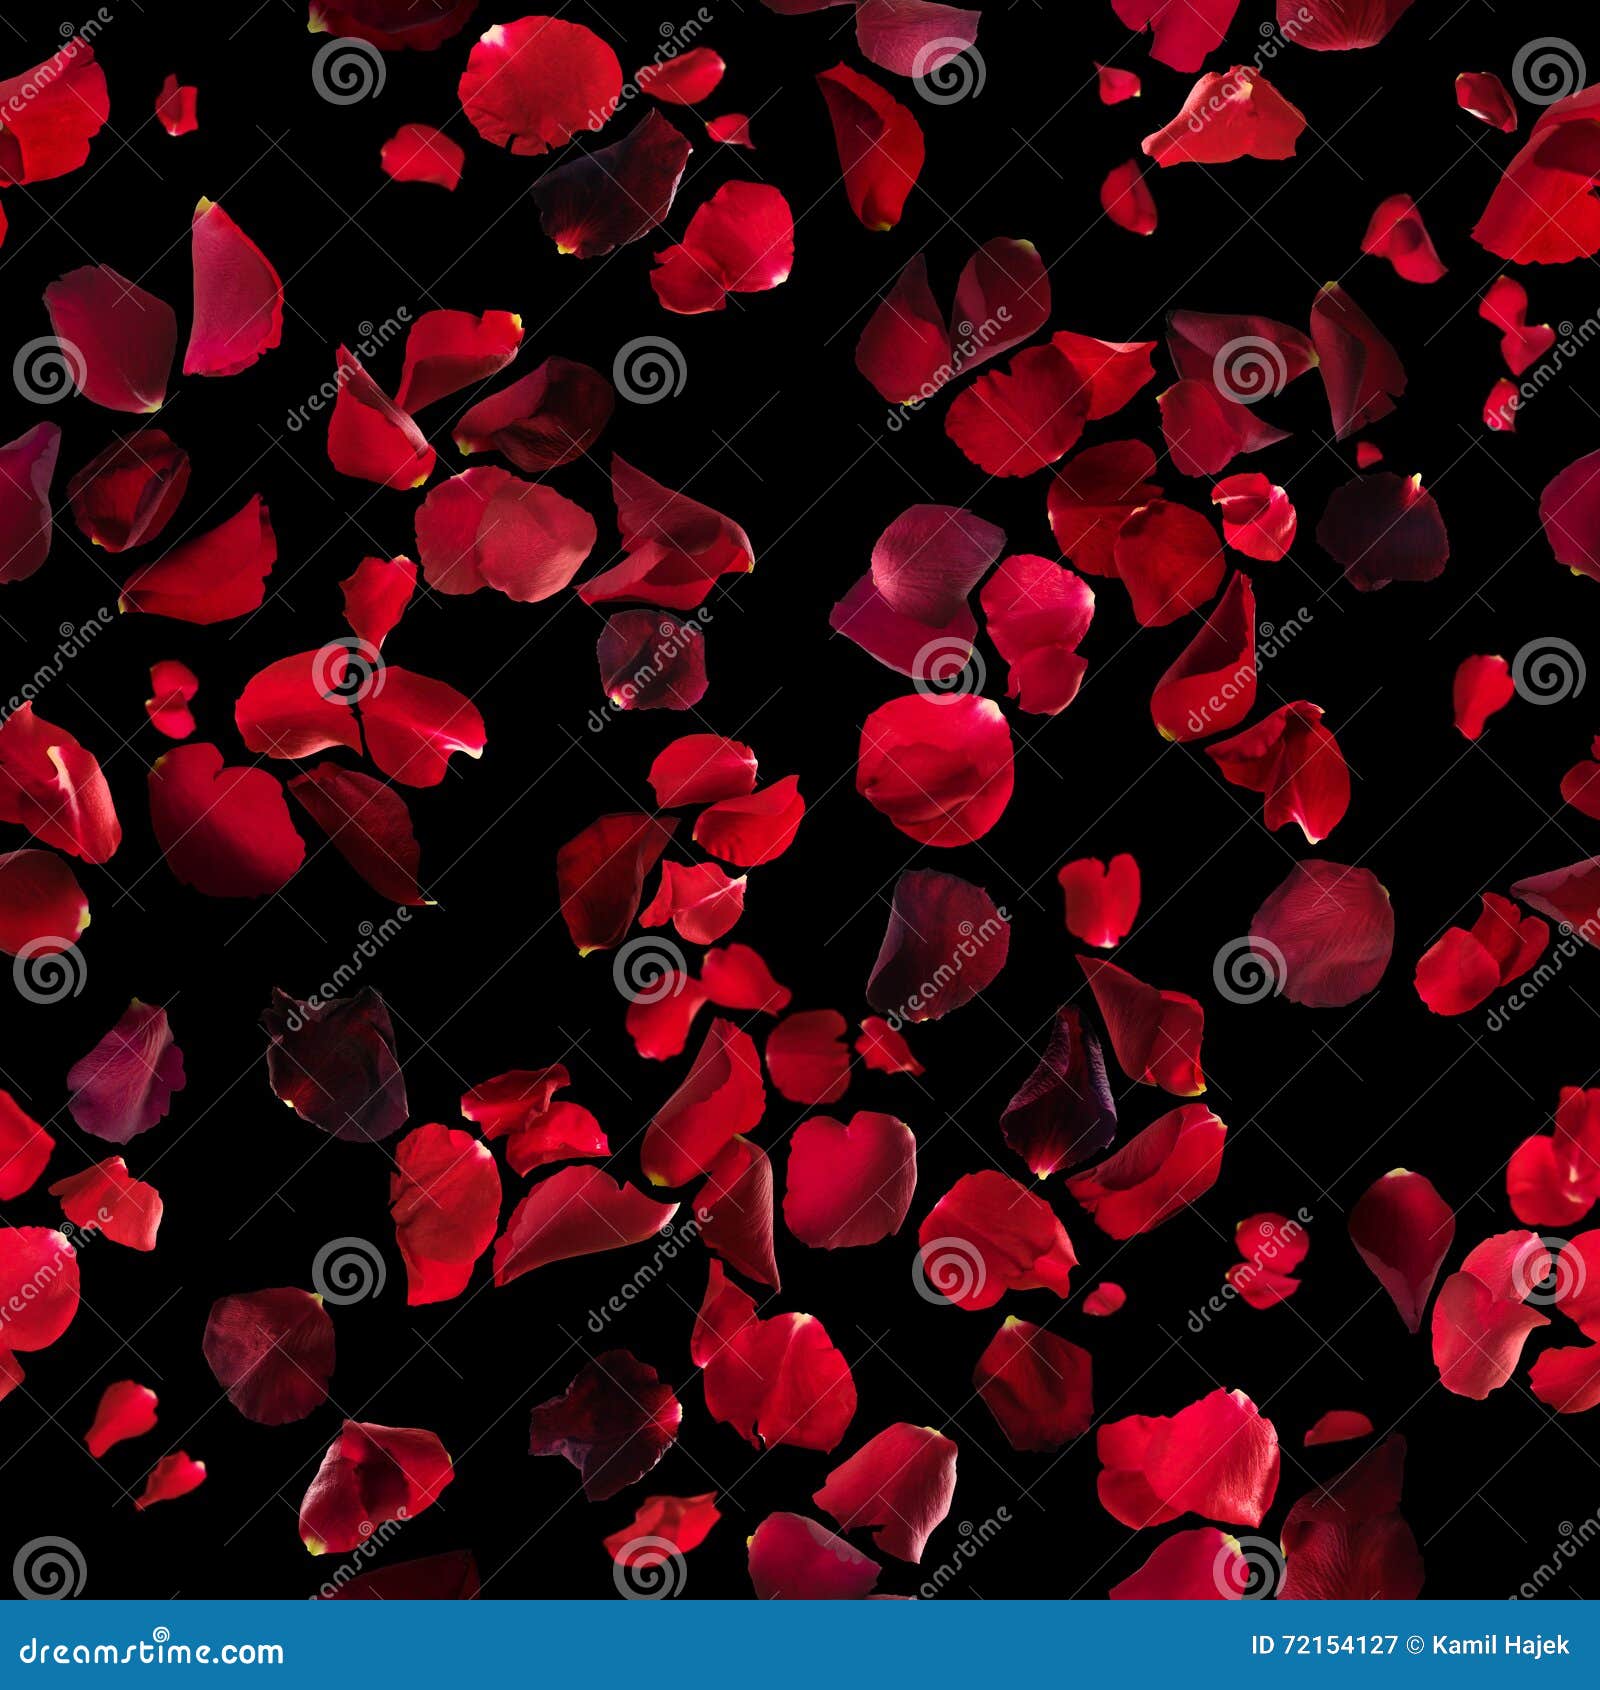 Red Rose Petals Texture on Black Stock Image - Image of background, floral:  72154127